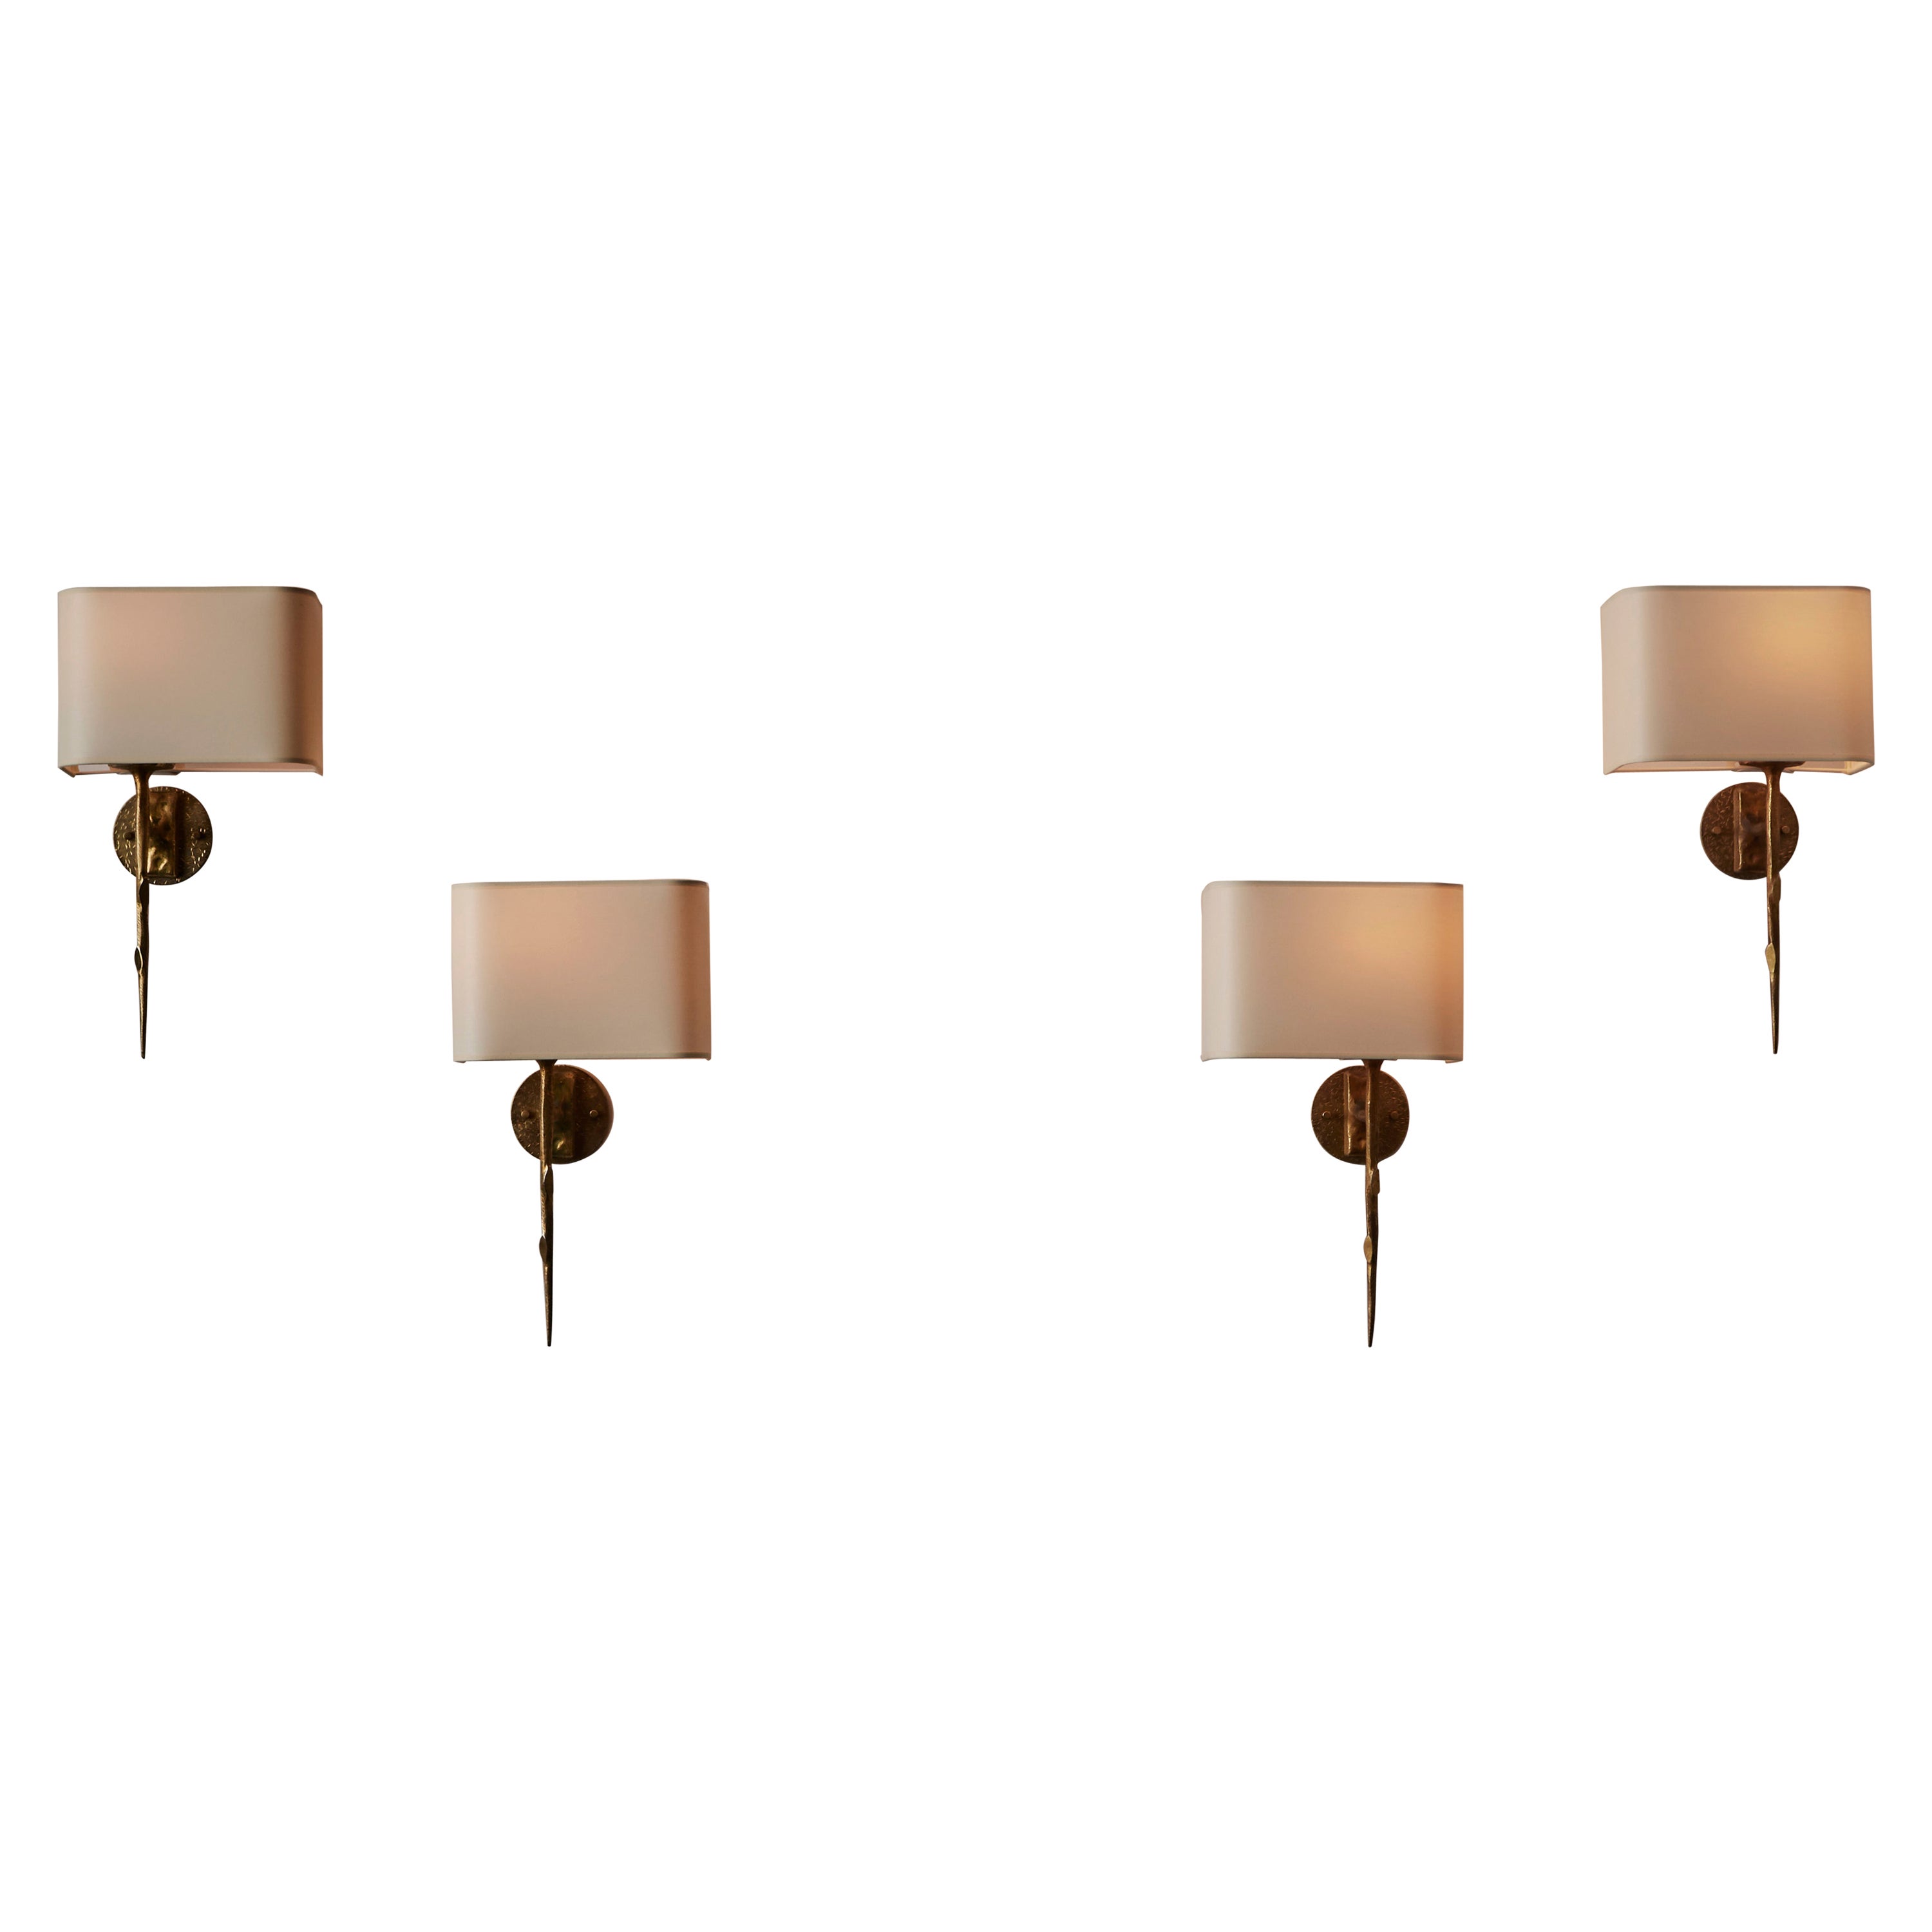 Arlus Wall Lights and Sconces